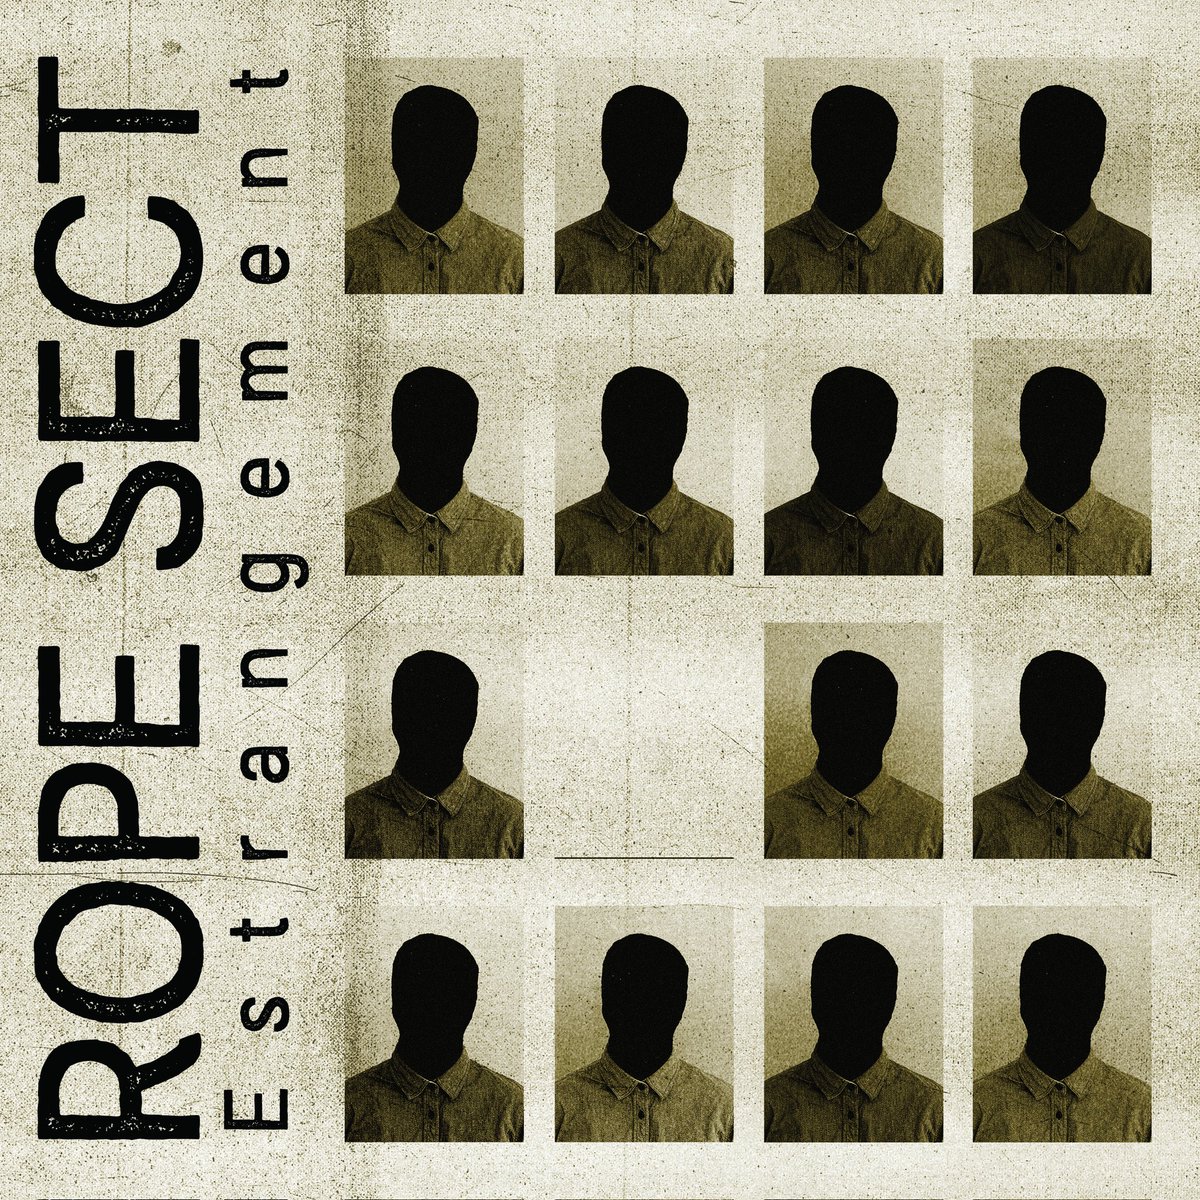 Today, Iron Bonehead Productions announces May 17th as the international release date for Rope Sect's highly anticipated second album, Estrangement, on CD and vinyl LP formats.